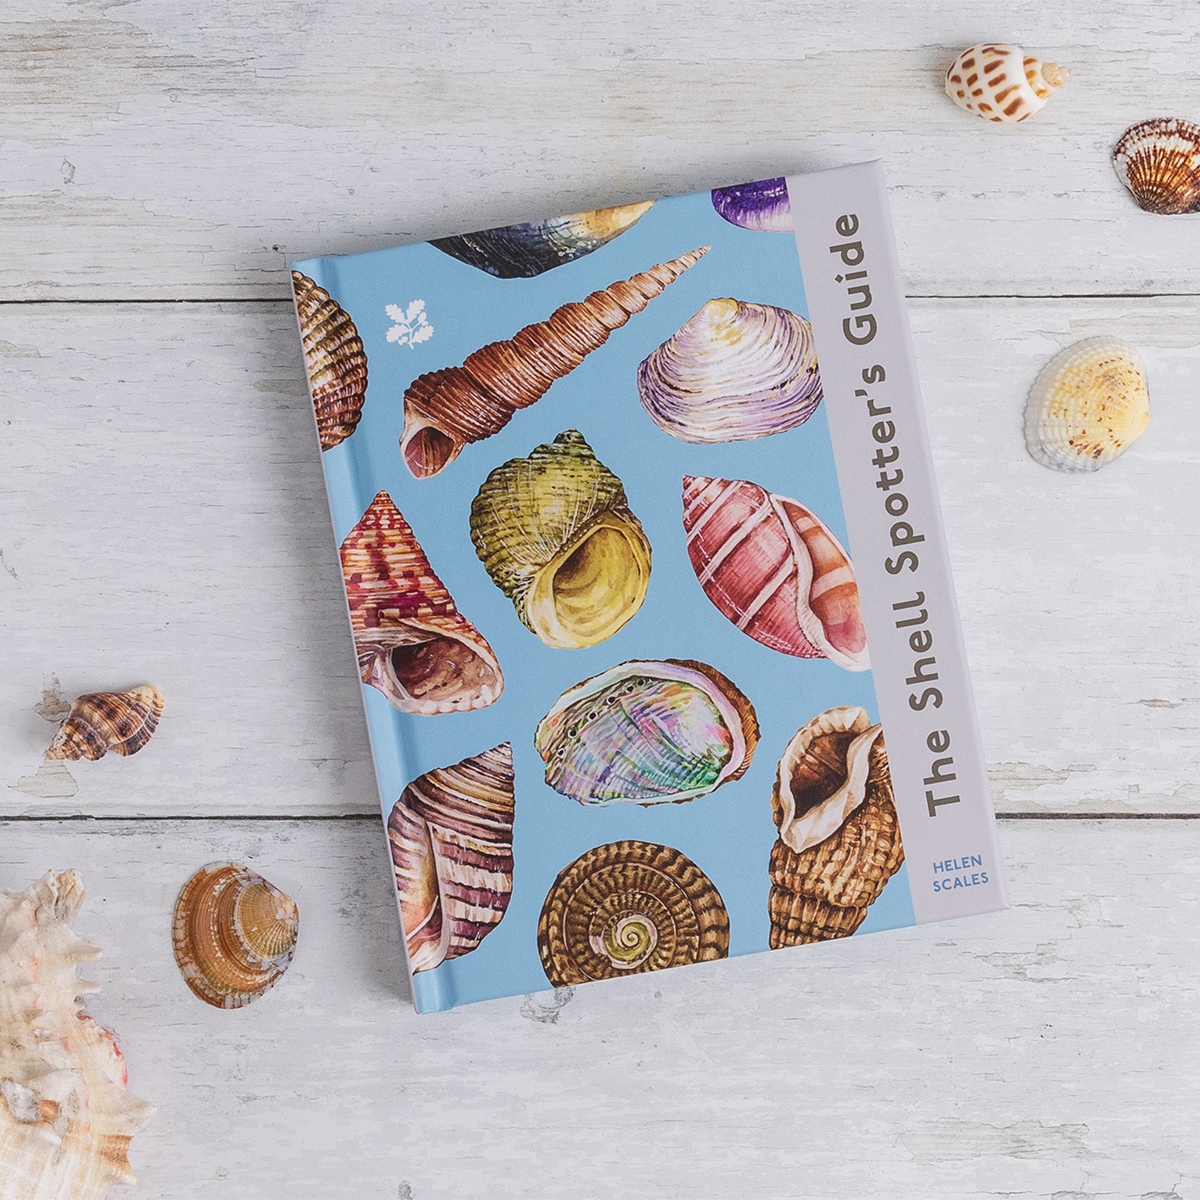 Every shell has a story to tell. Learn more about many of the beautiful and surprising shells found on our beaches with The Shell Spotter's Guide by @helenscales 🐚 Pre-order at ow.ly/SKvc50QSwXh